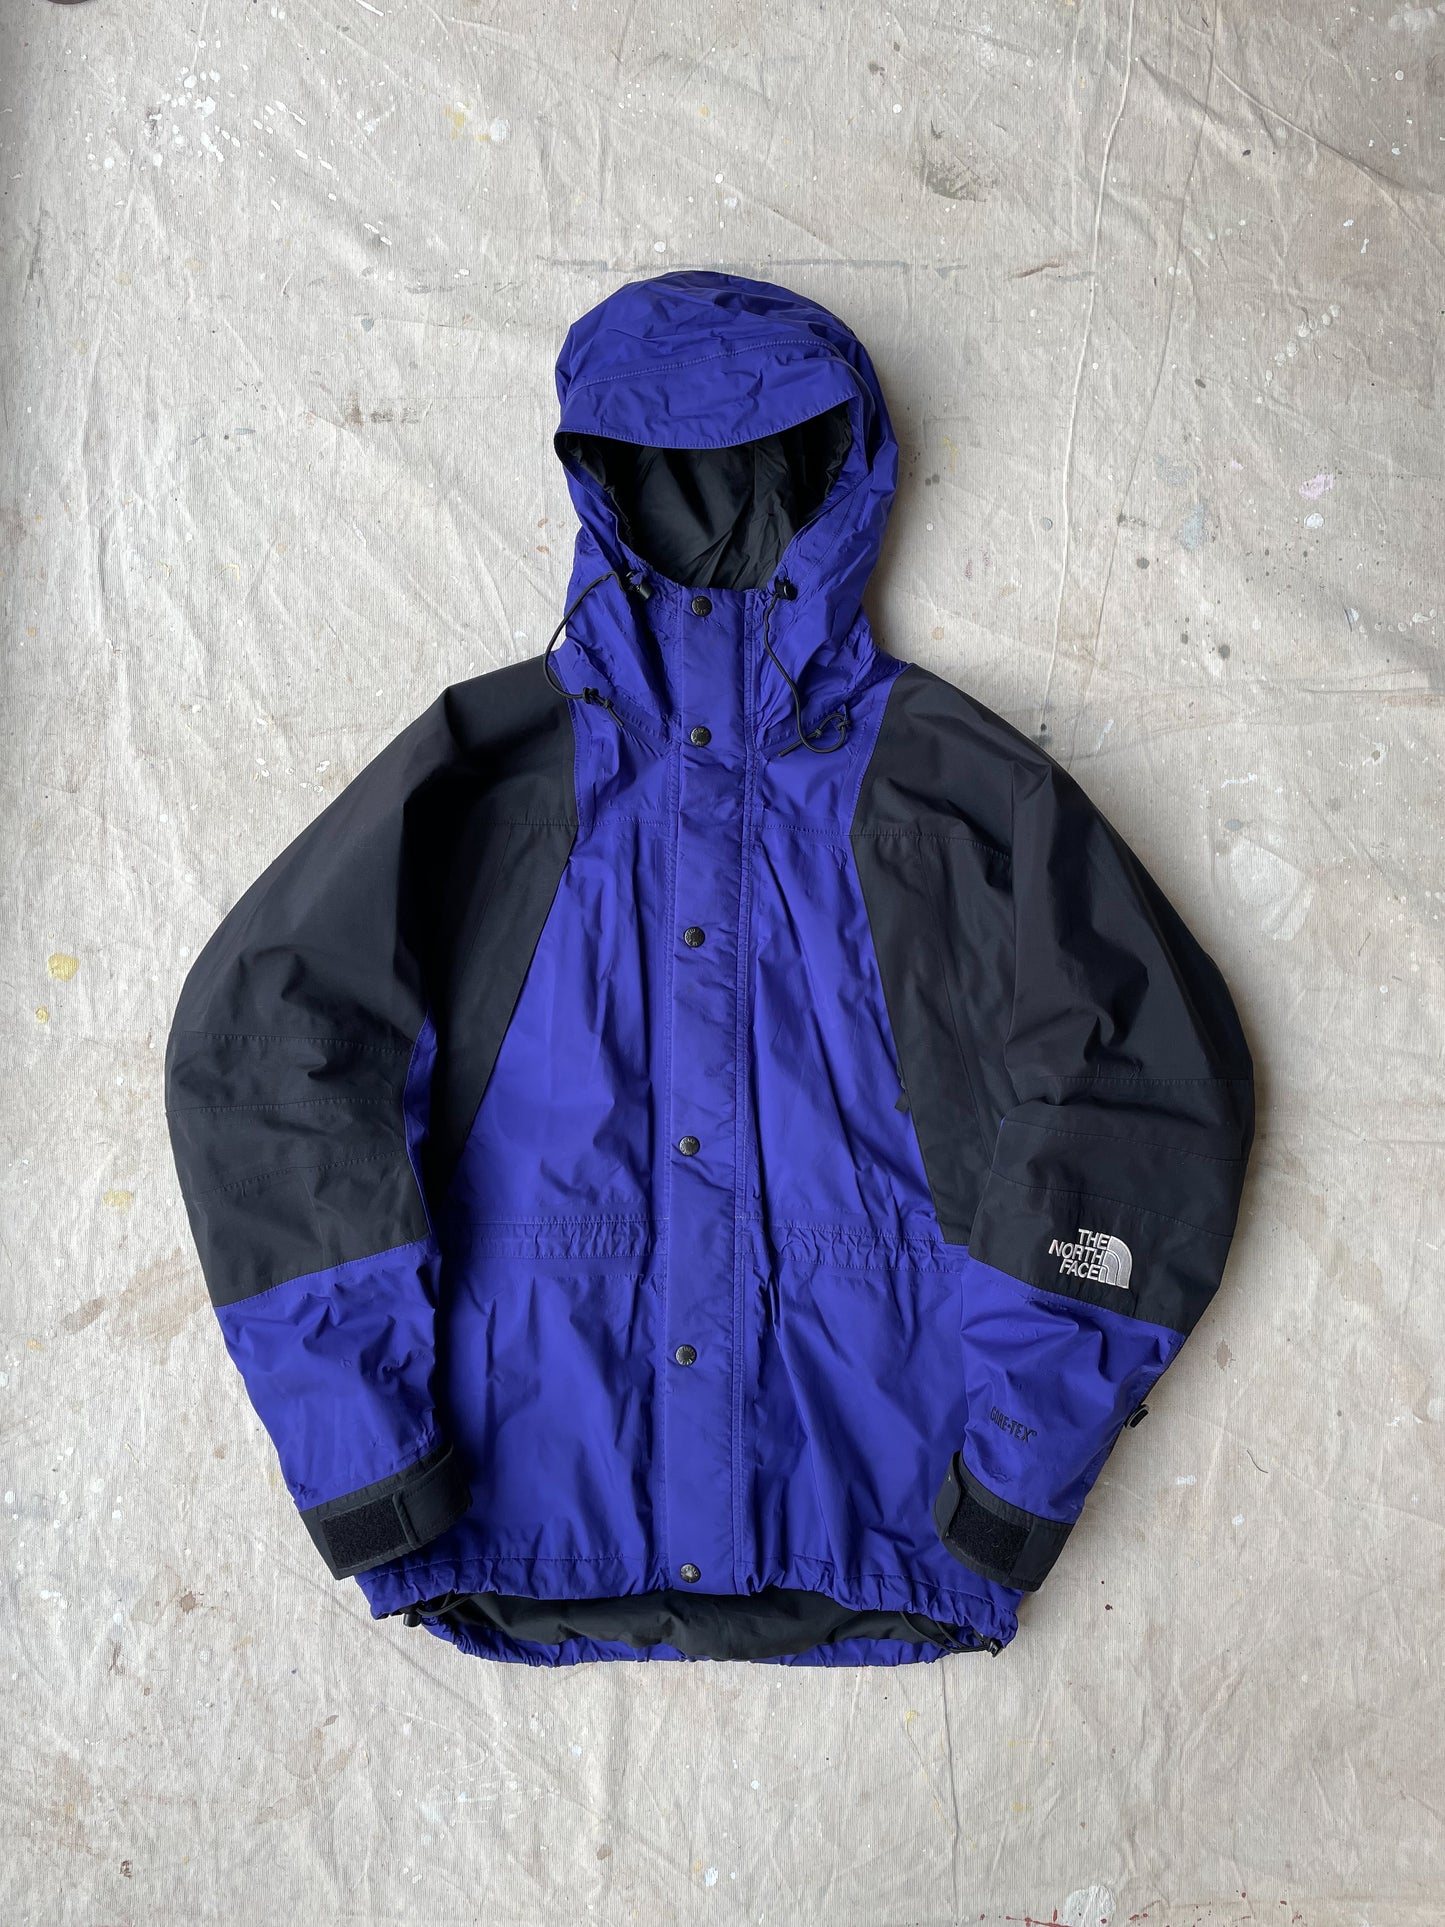 THE NORTH FACE JACKET—PURPLE [M]